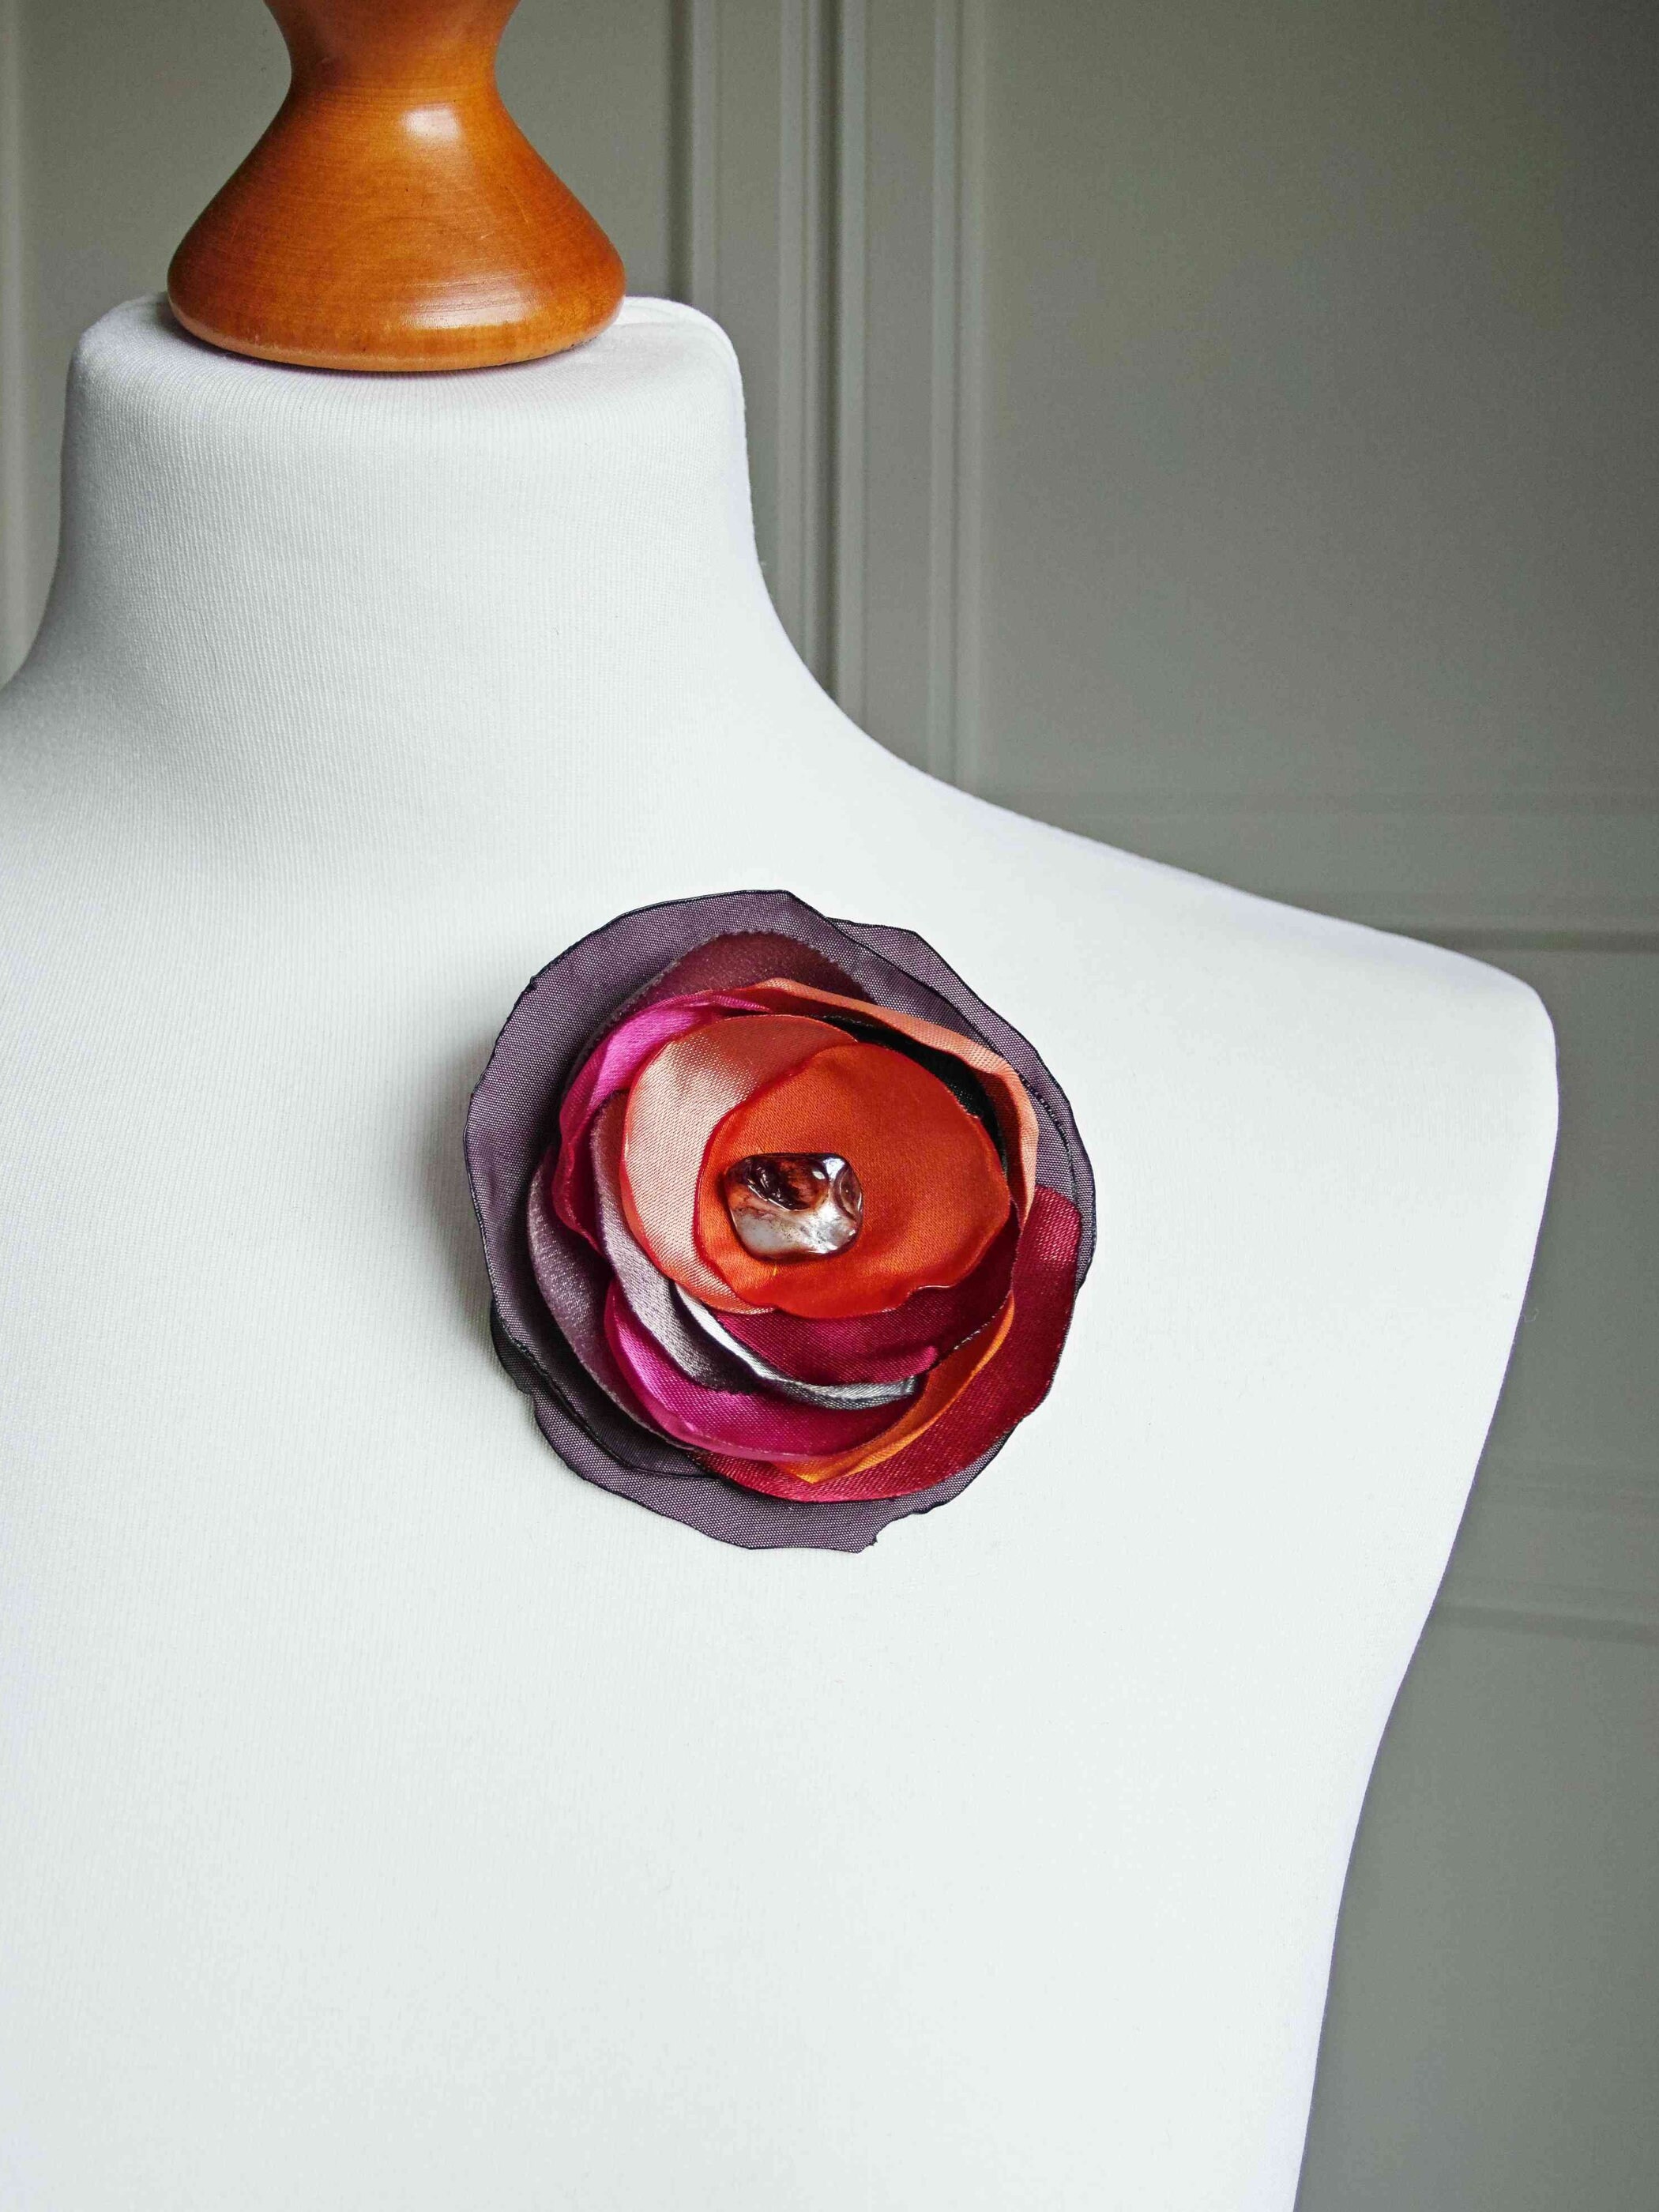 BLUSHING Gray-upcycled Fabric Flower Pin/brooch Wearable Art